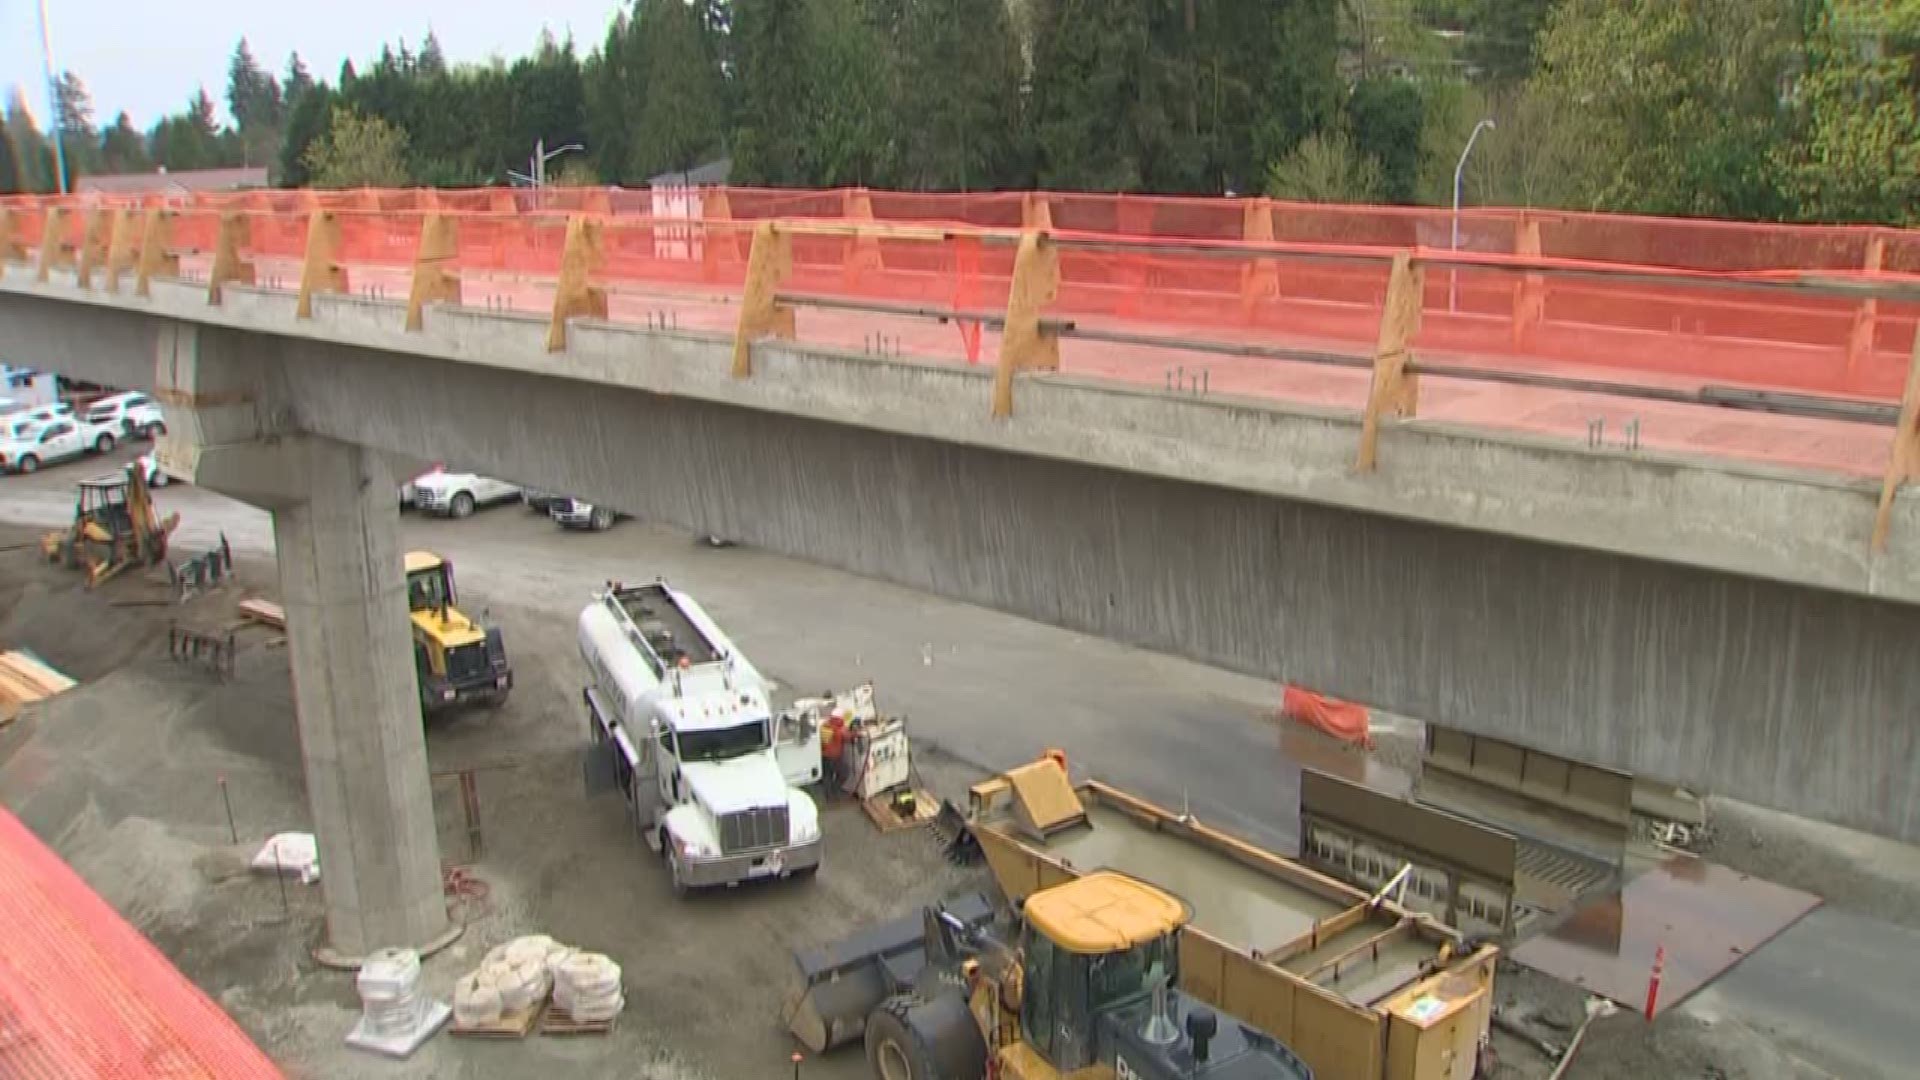 It's a milestone for one of our region's biggest construction projects. Crews are more than half way finished with the East Link Light Rail. The project extends light rail 14 miles from downtown Seattle to Mercer Island, downtown Bellevue and the Overlake area of Redmond with ten different stations along I-90. KING 5 takes a look.